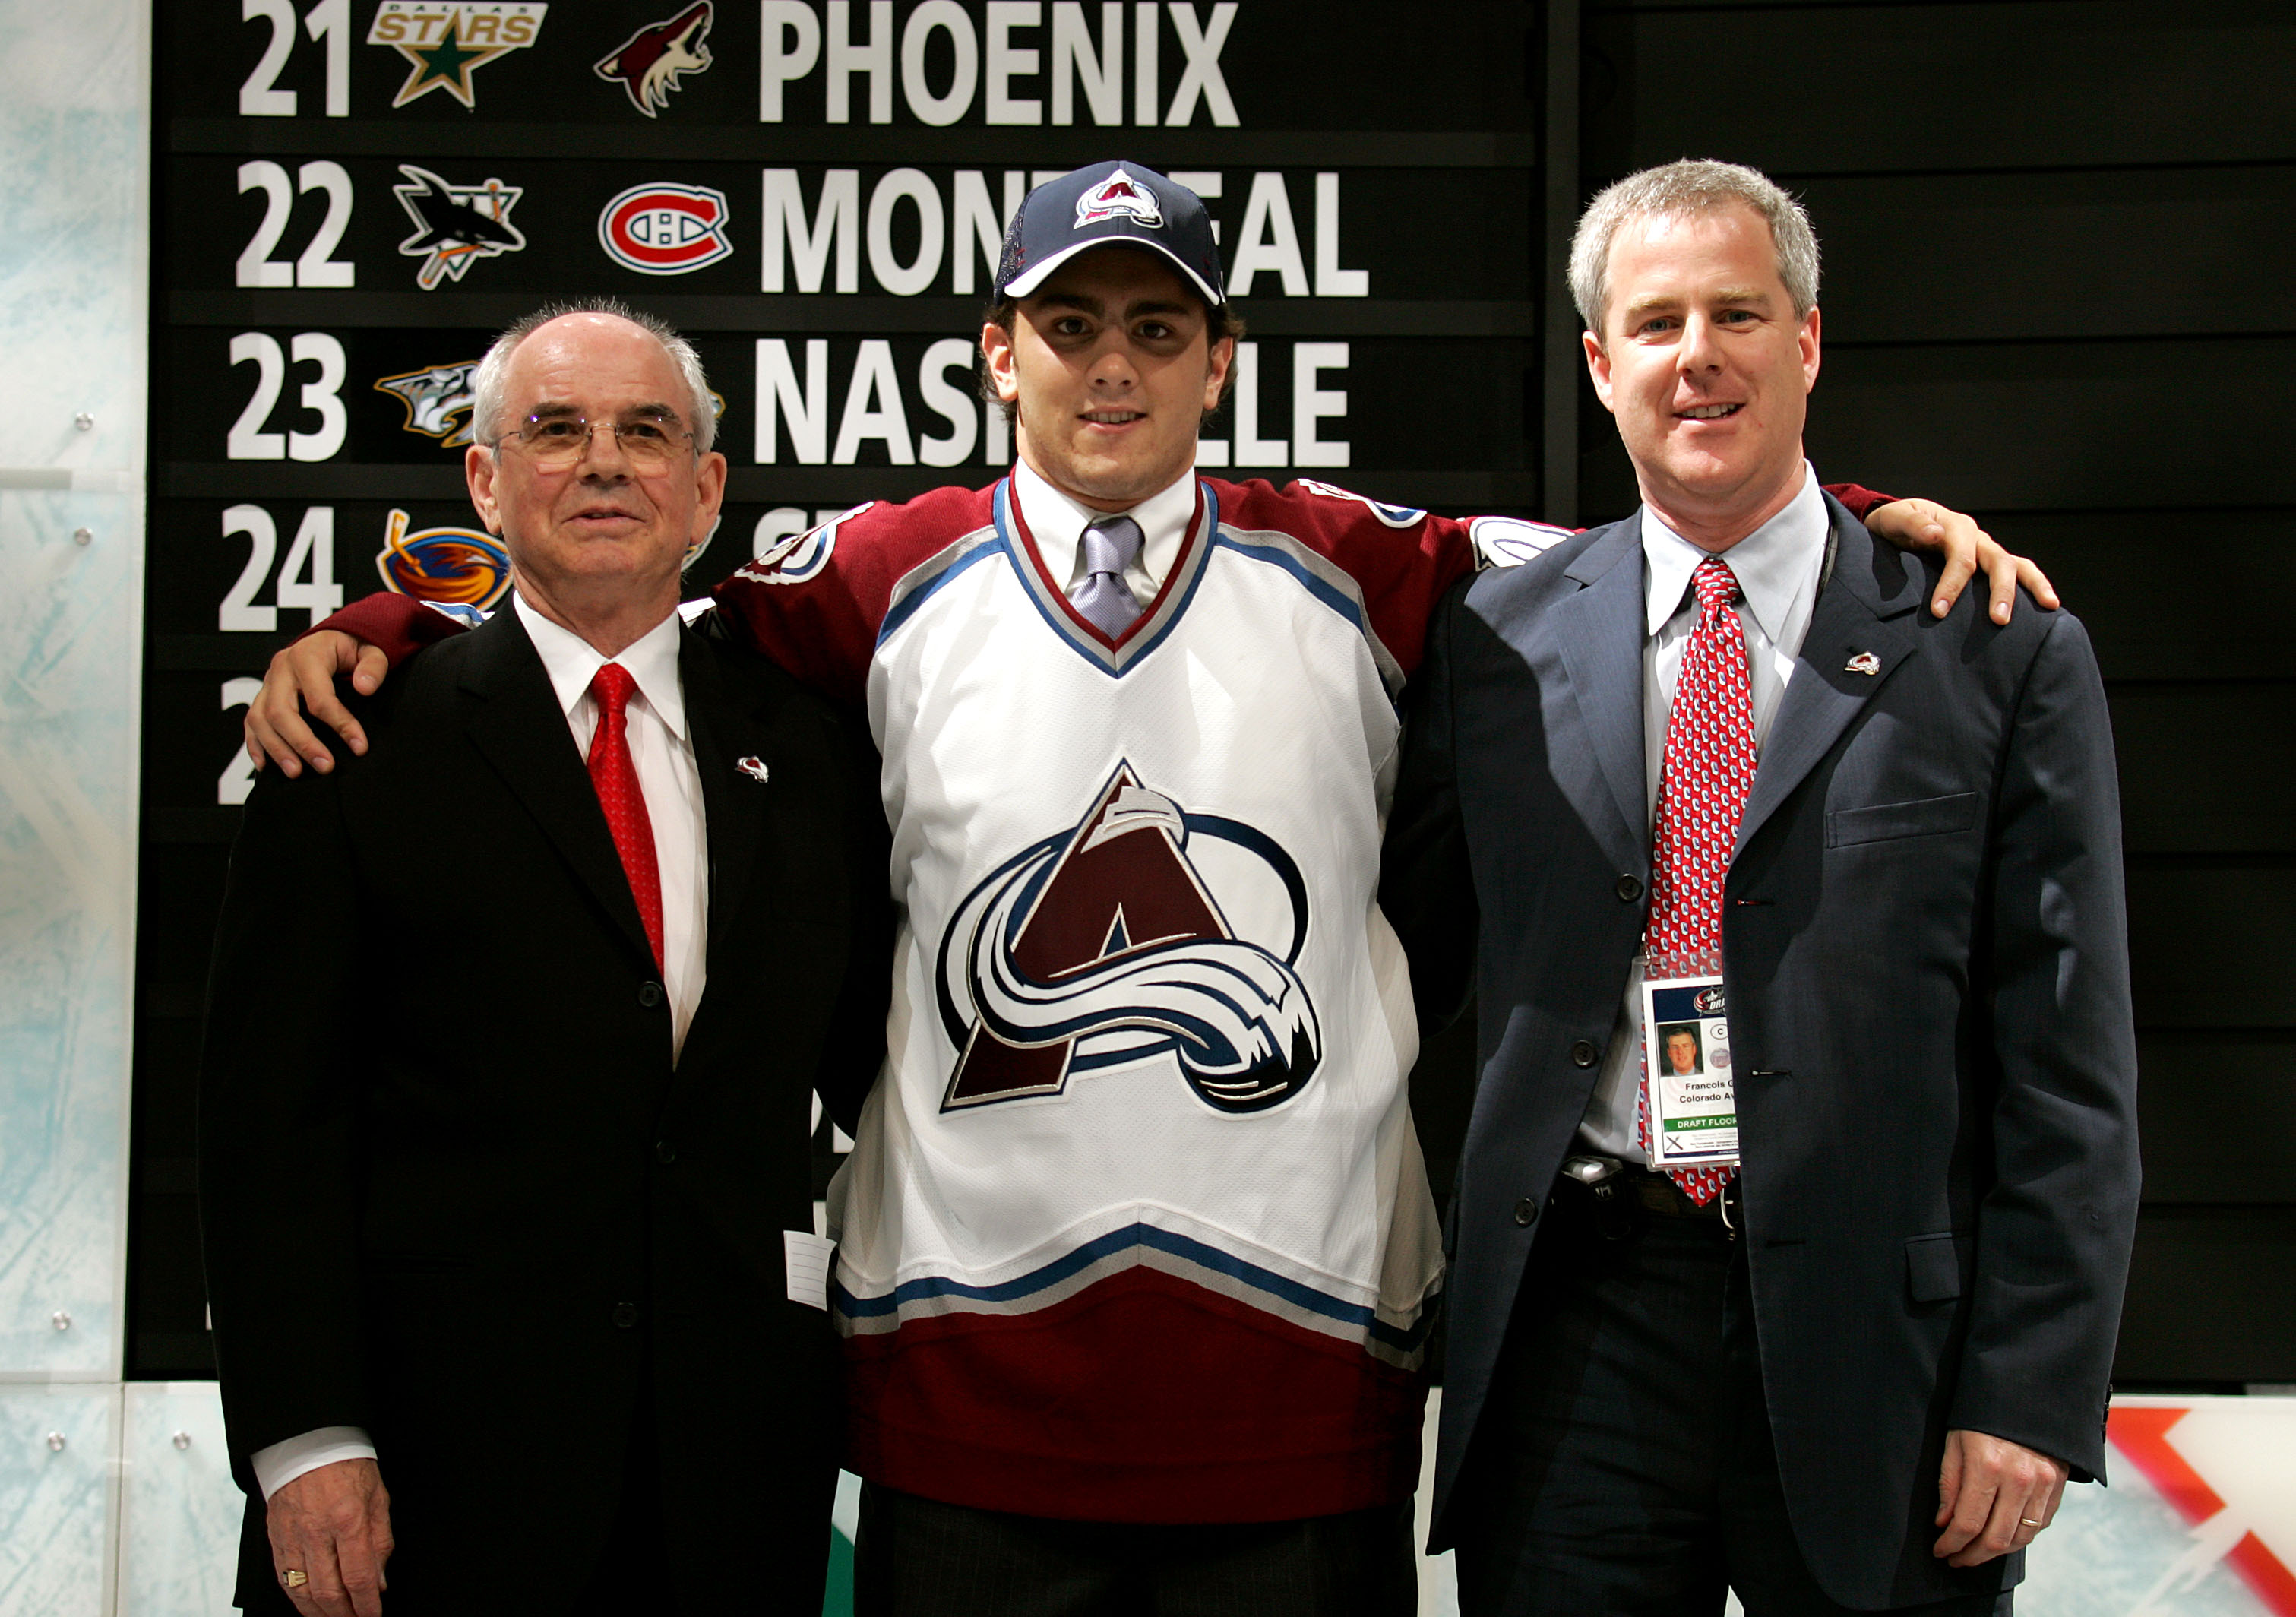 20 Years After The 2003 NHL Draft – What Became Of The Selected